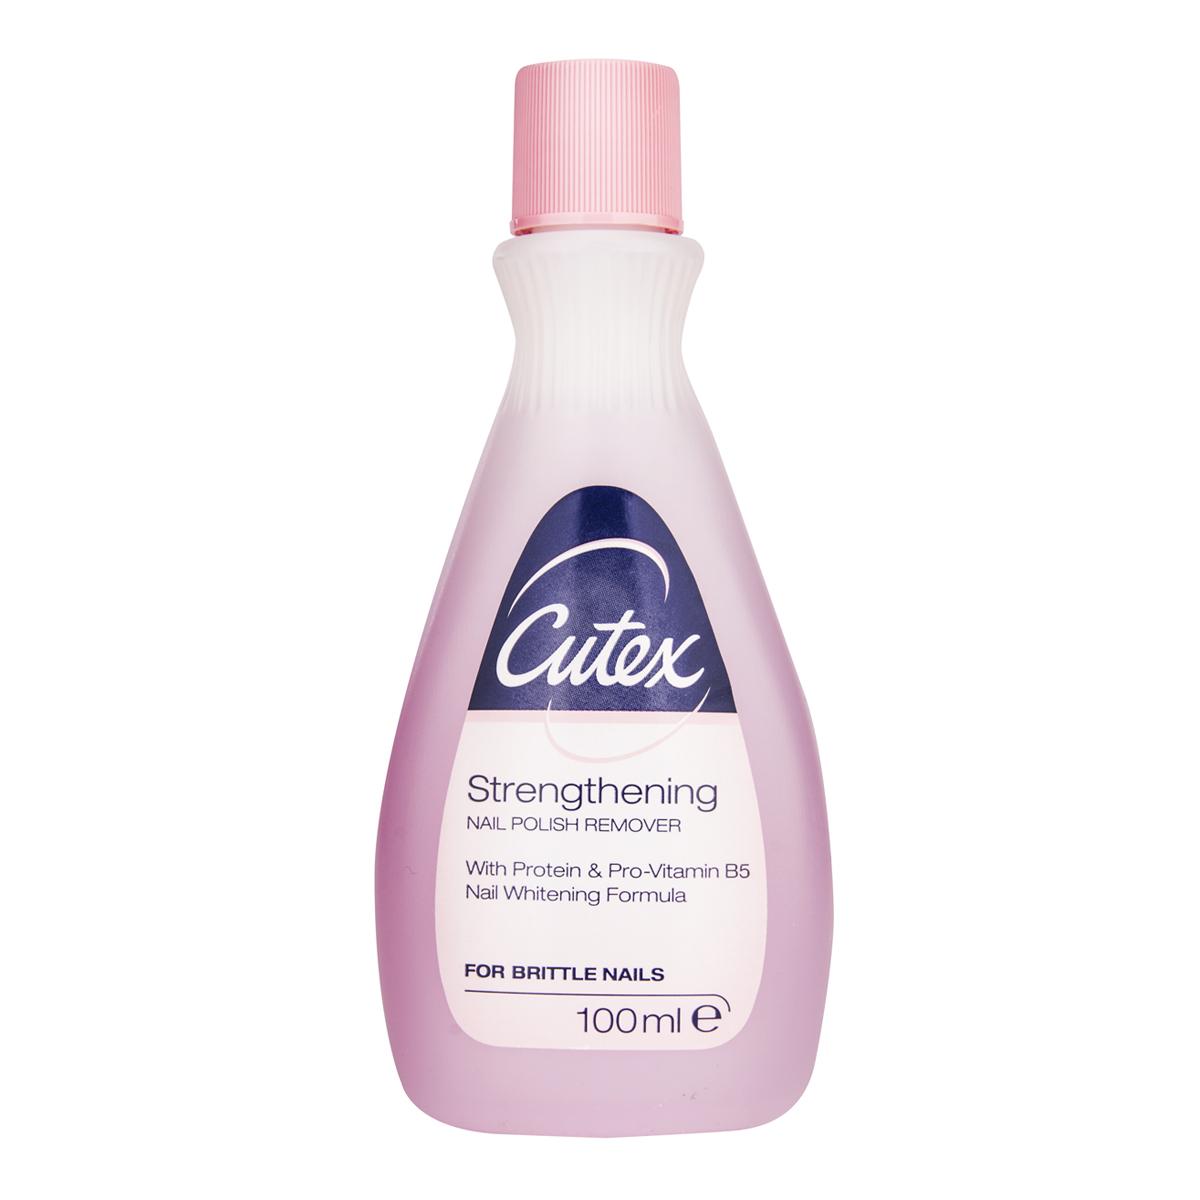 Order for € from Beautybuys Ireland - Cutex Strengthening Nail Polish  Remover is designed for those with brittle nails. The strengthening formula  contains protein and pro-vitamin B5 which nourishes and whitens the